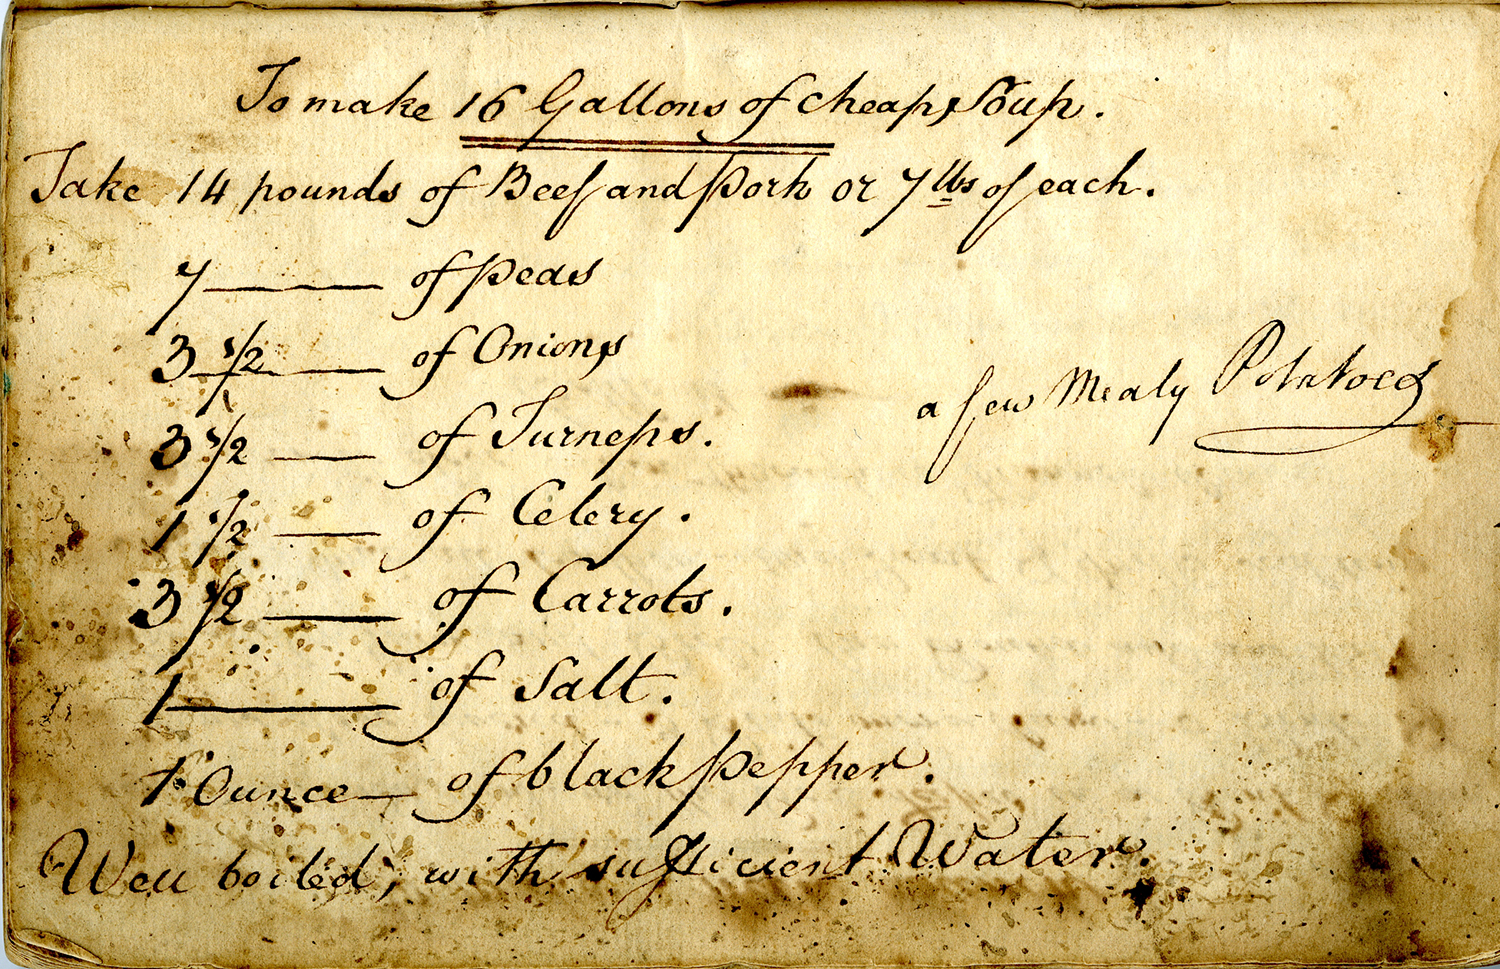 Recipe from 1800: to make 16 gallons of cheap soup.